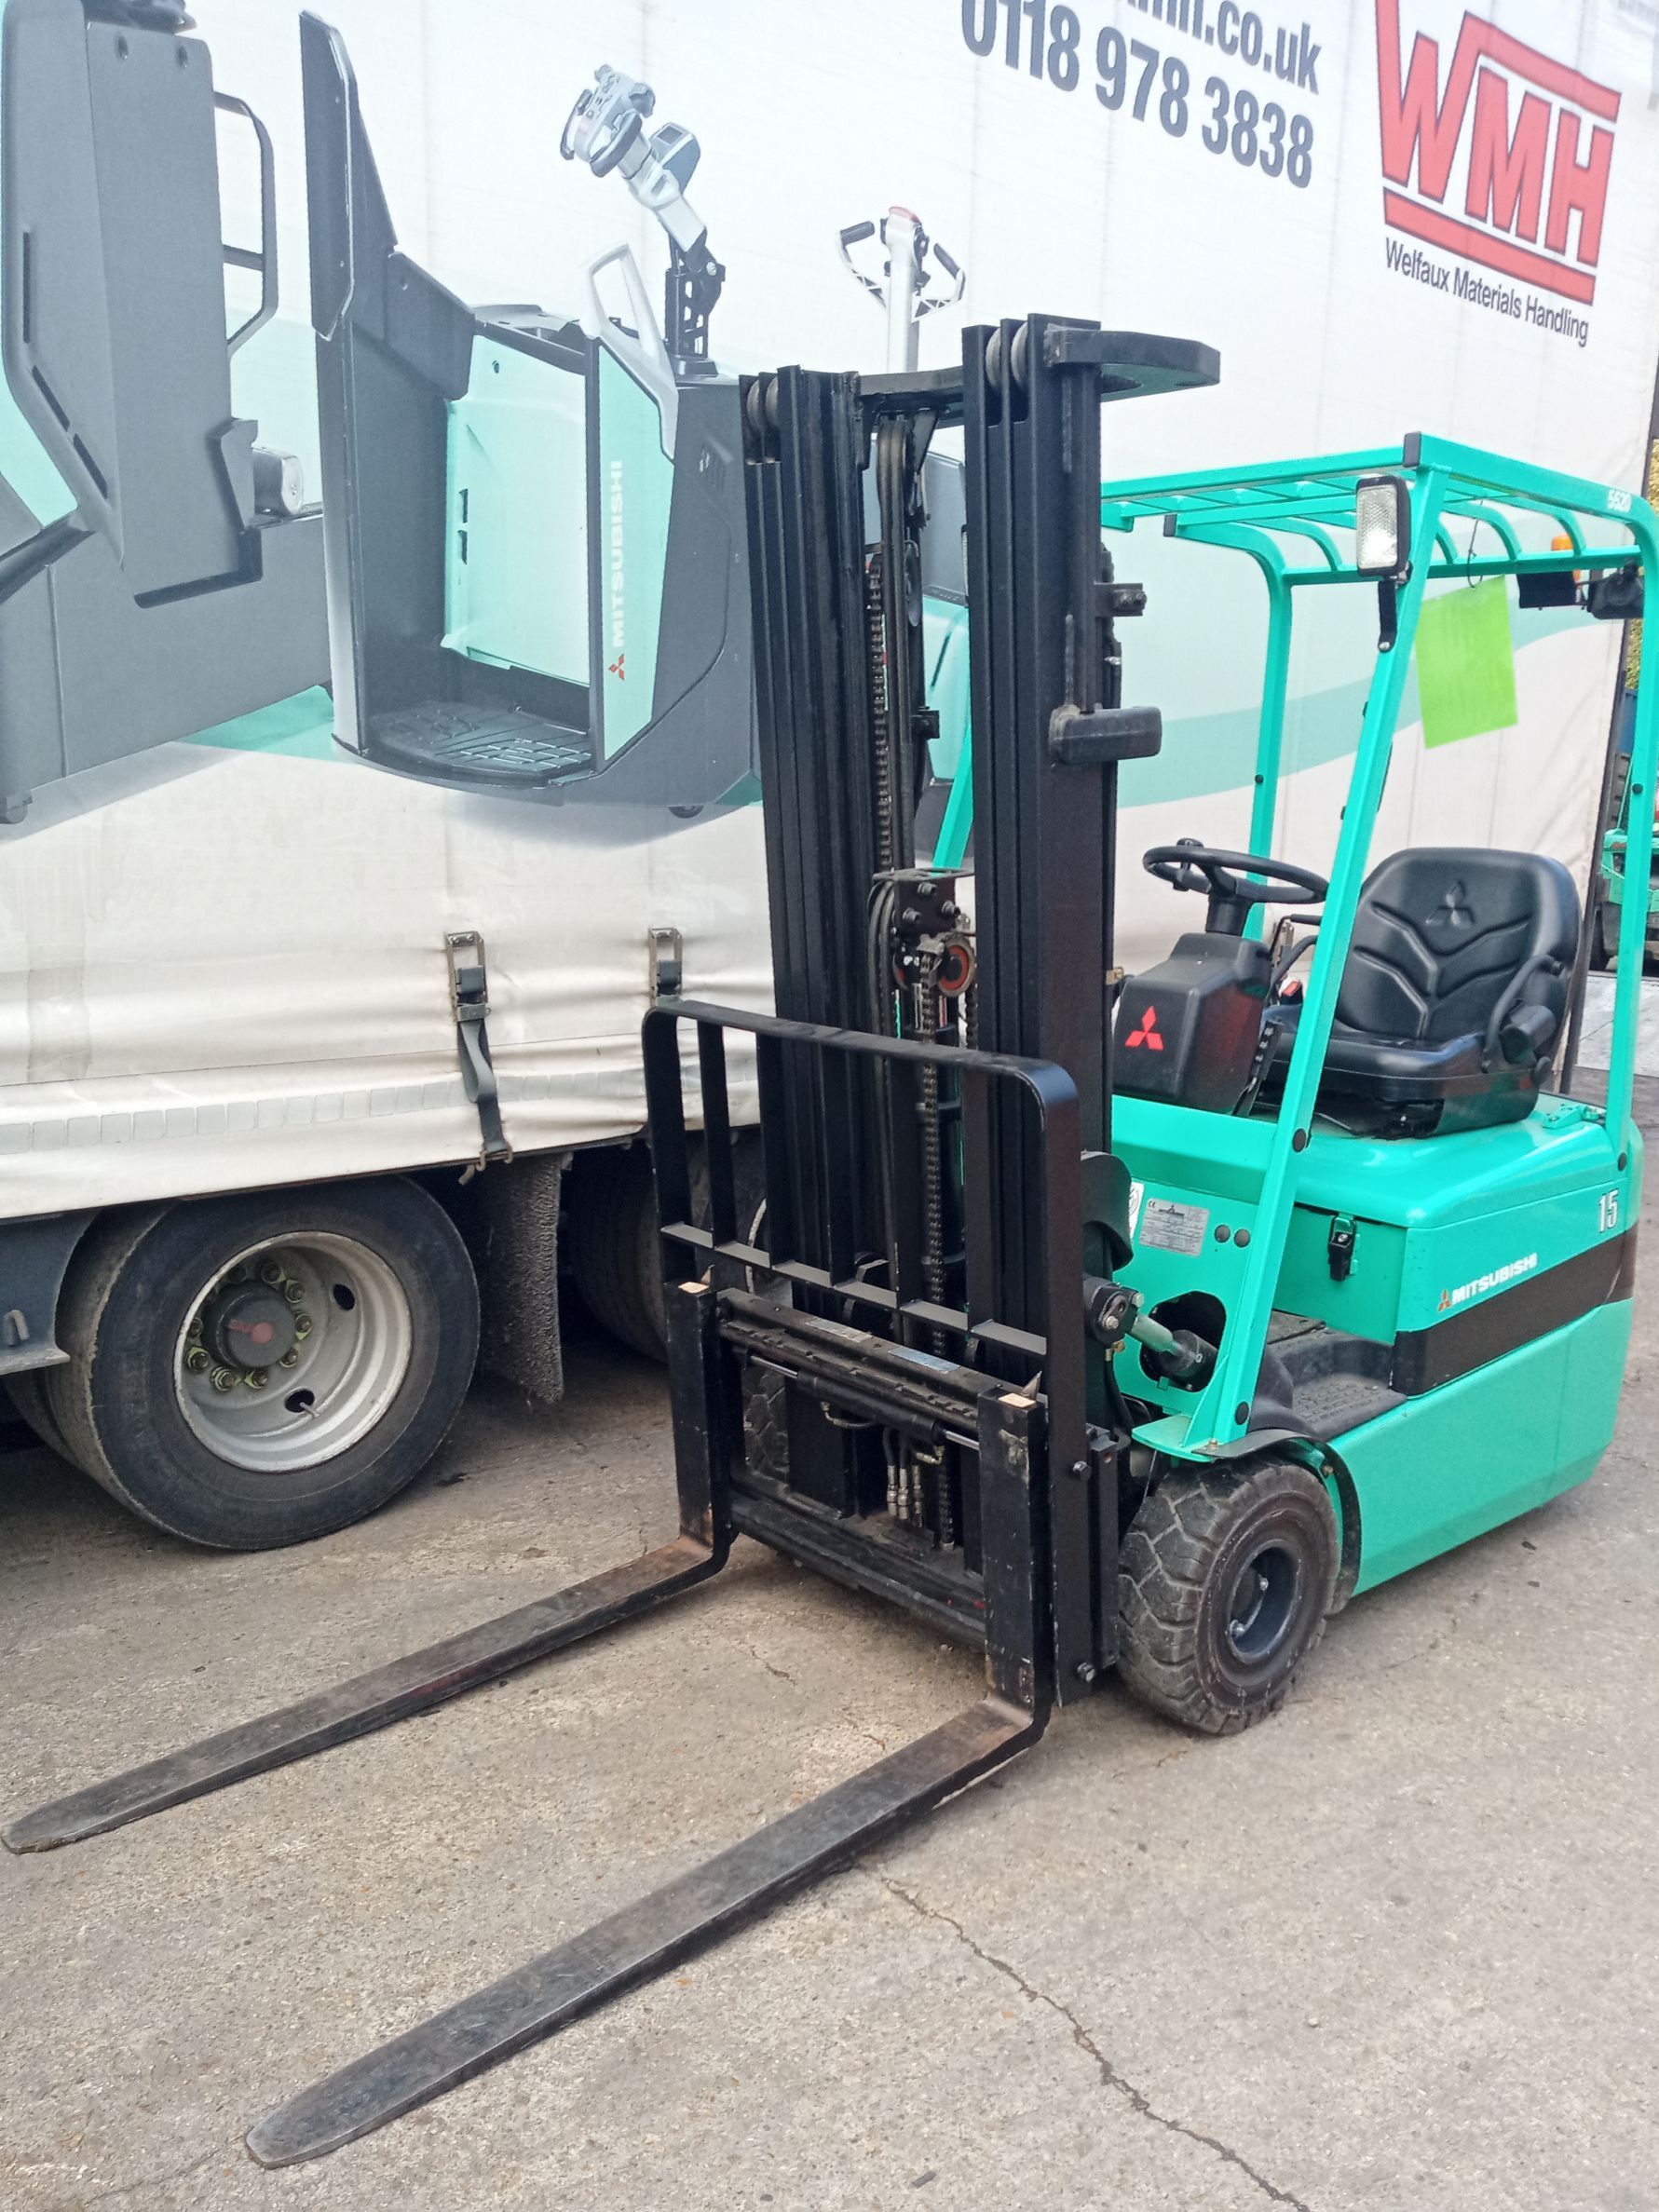 A green forklift is parked in front of a truck.